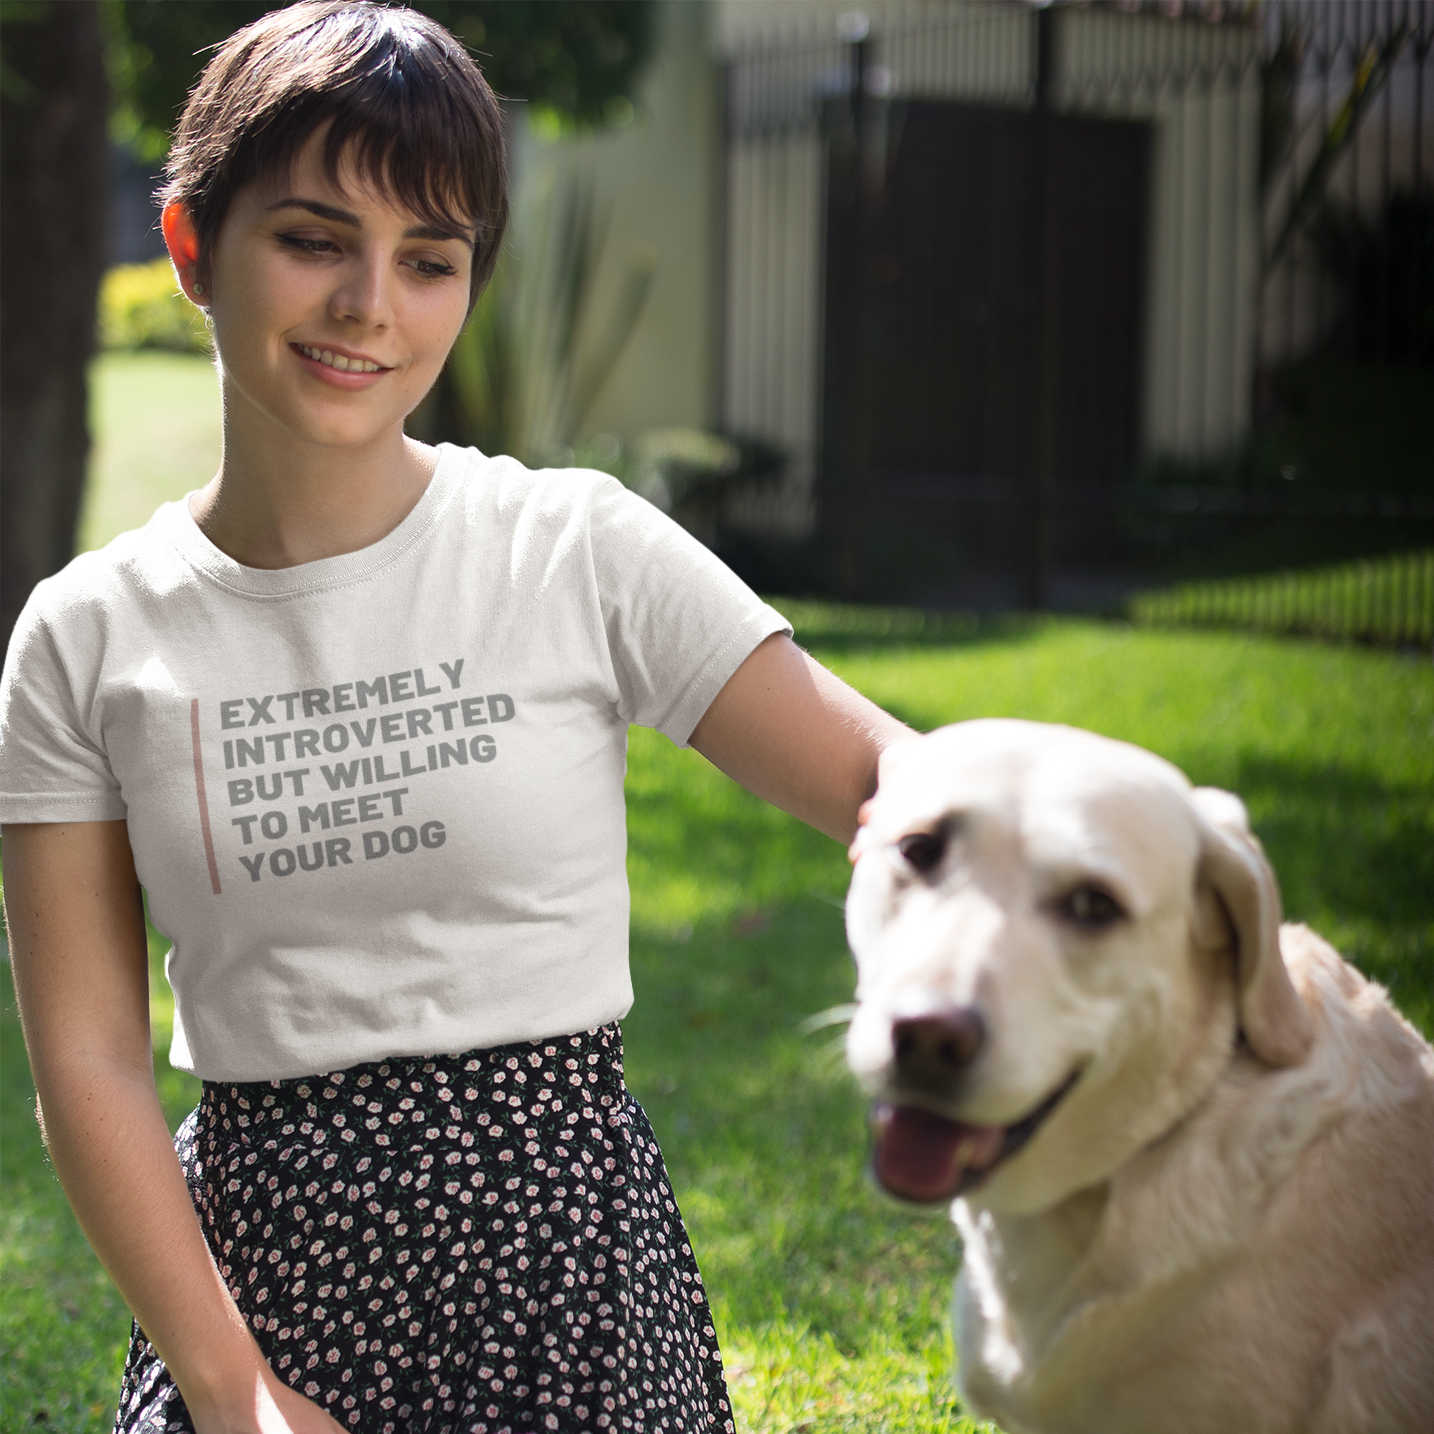 Introverted Willing to Meet Dogs Tee